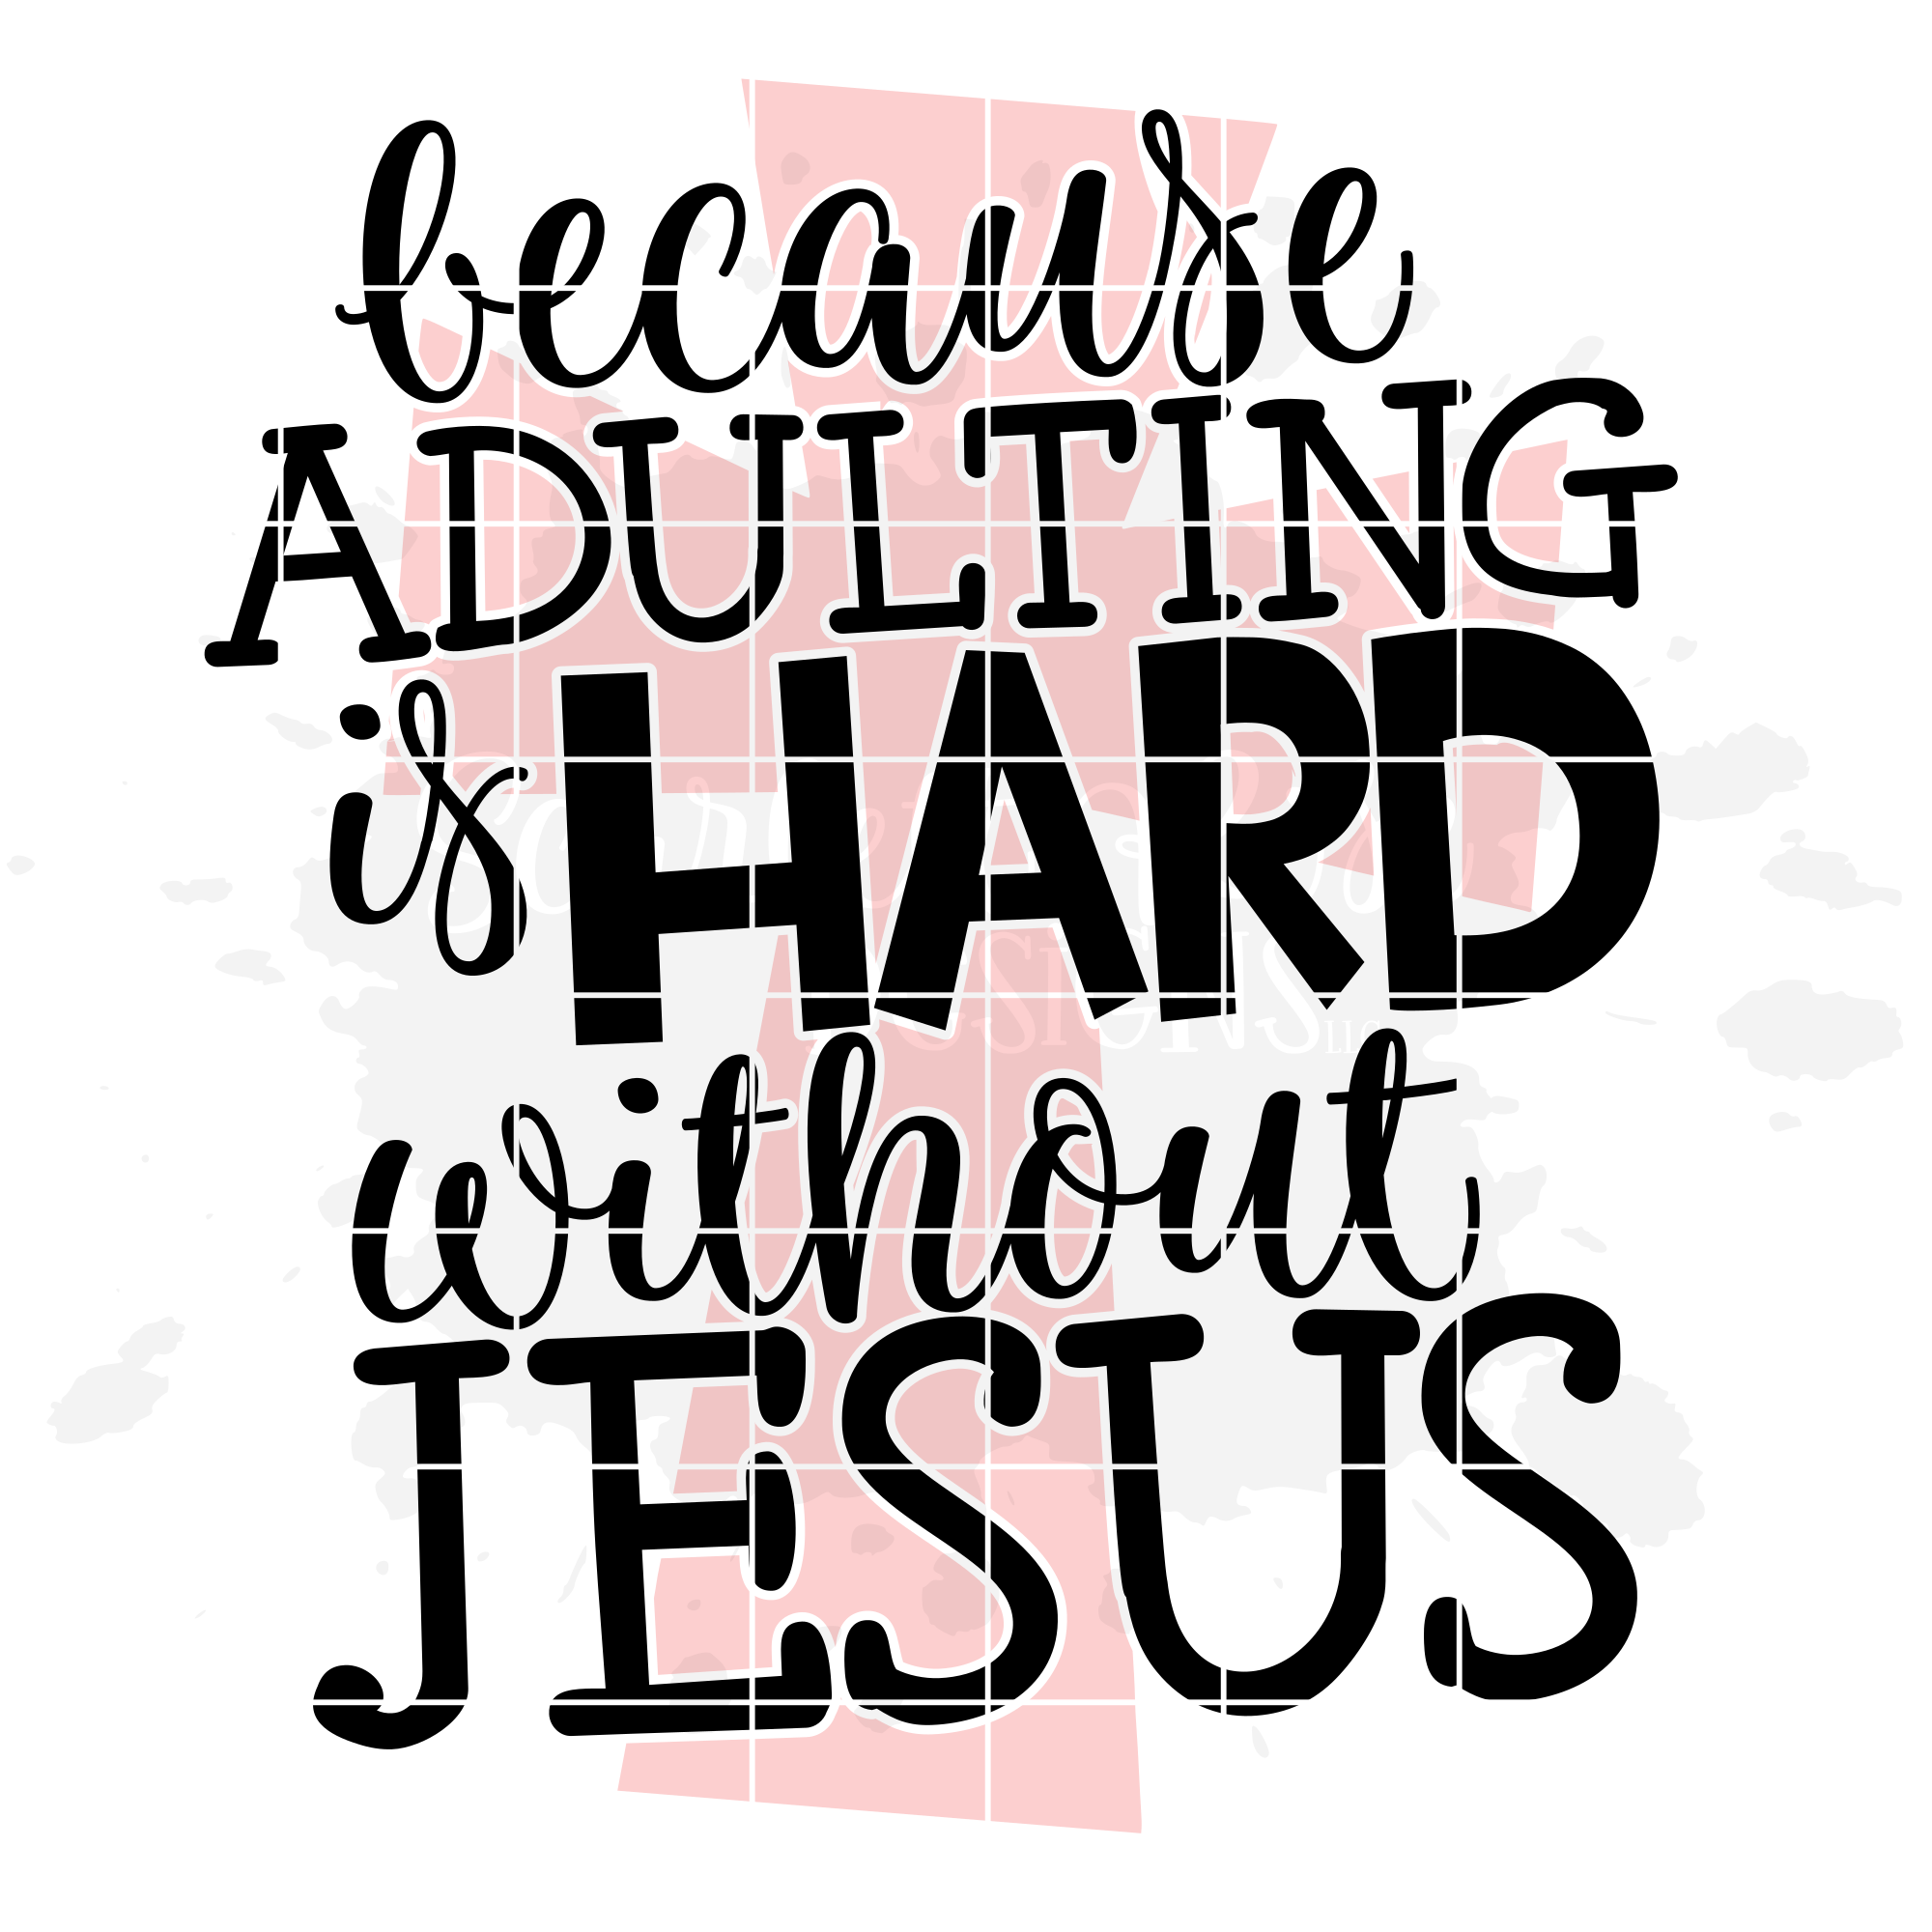 Download Because Adulting is Hard without Jesus 1 - SVG cut file ...